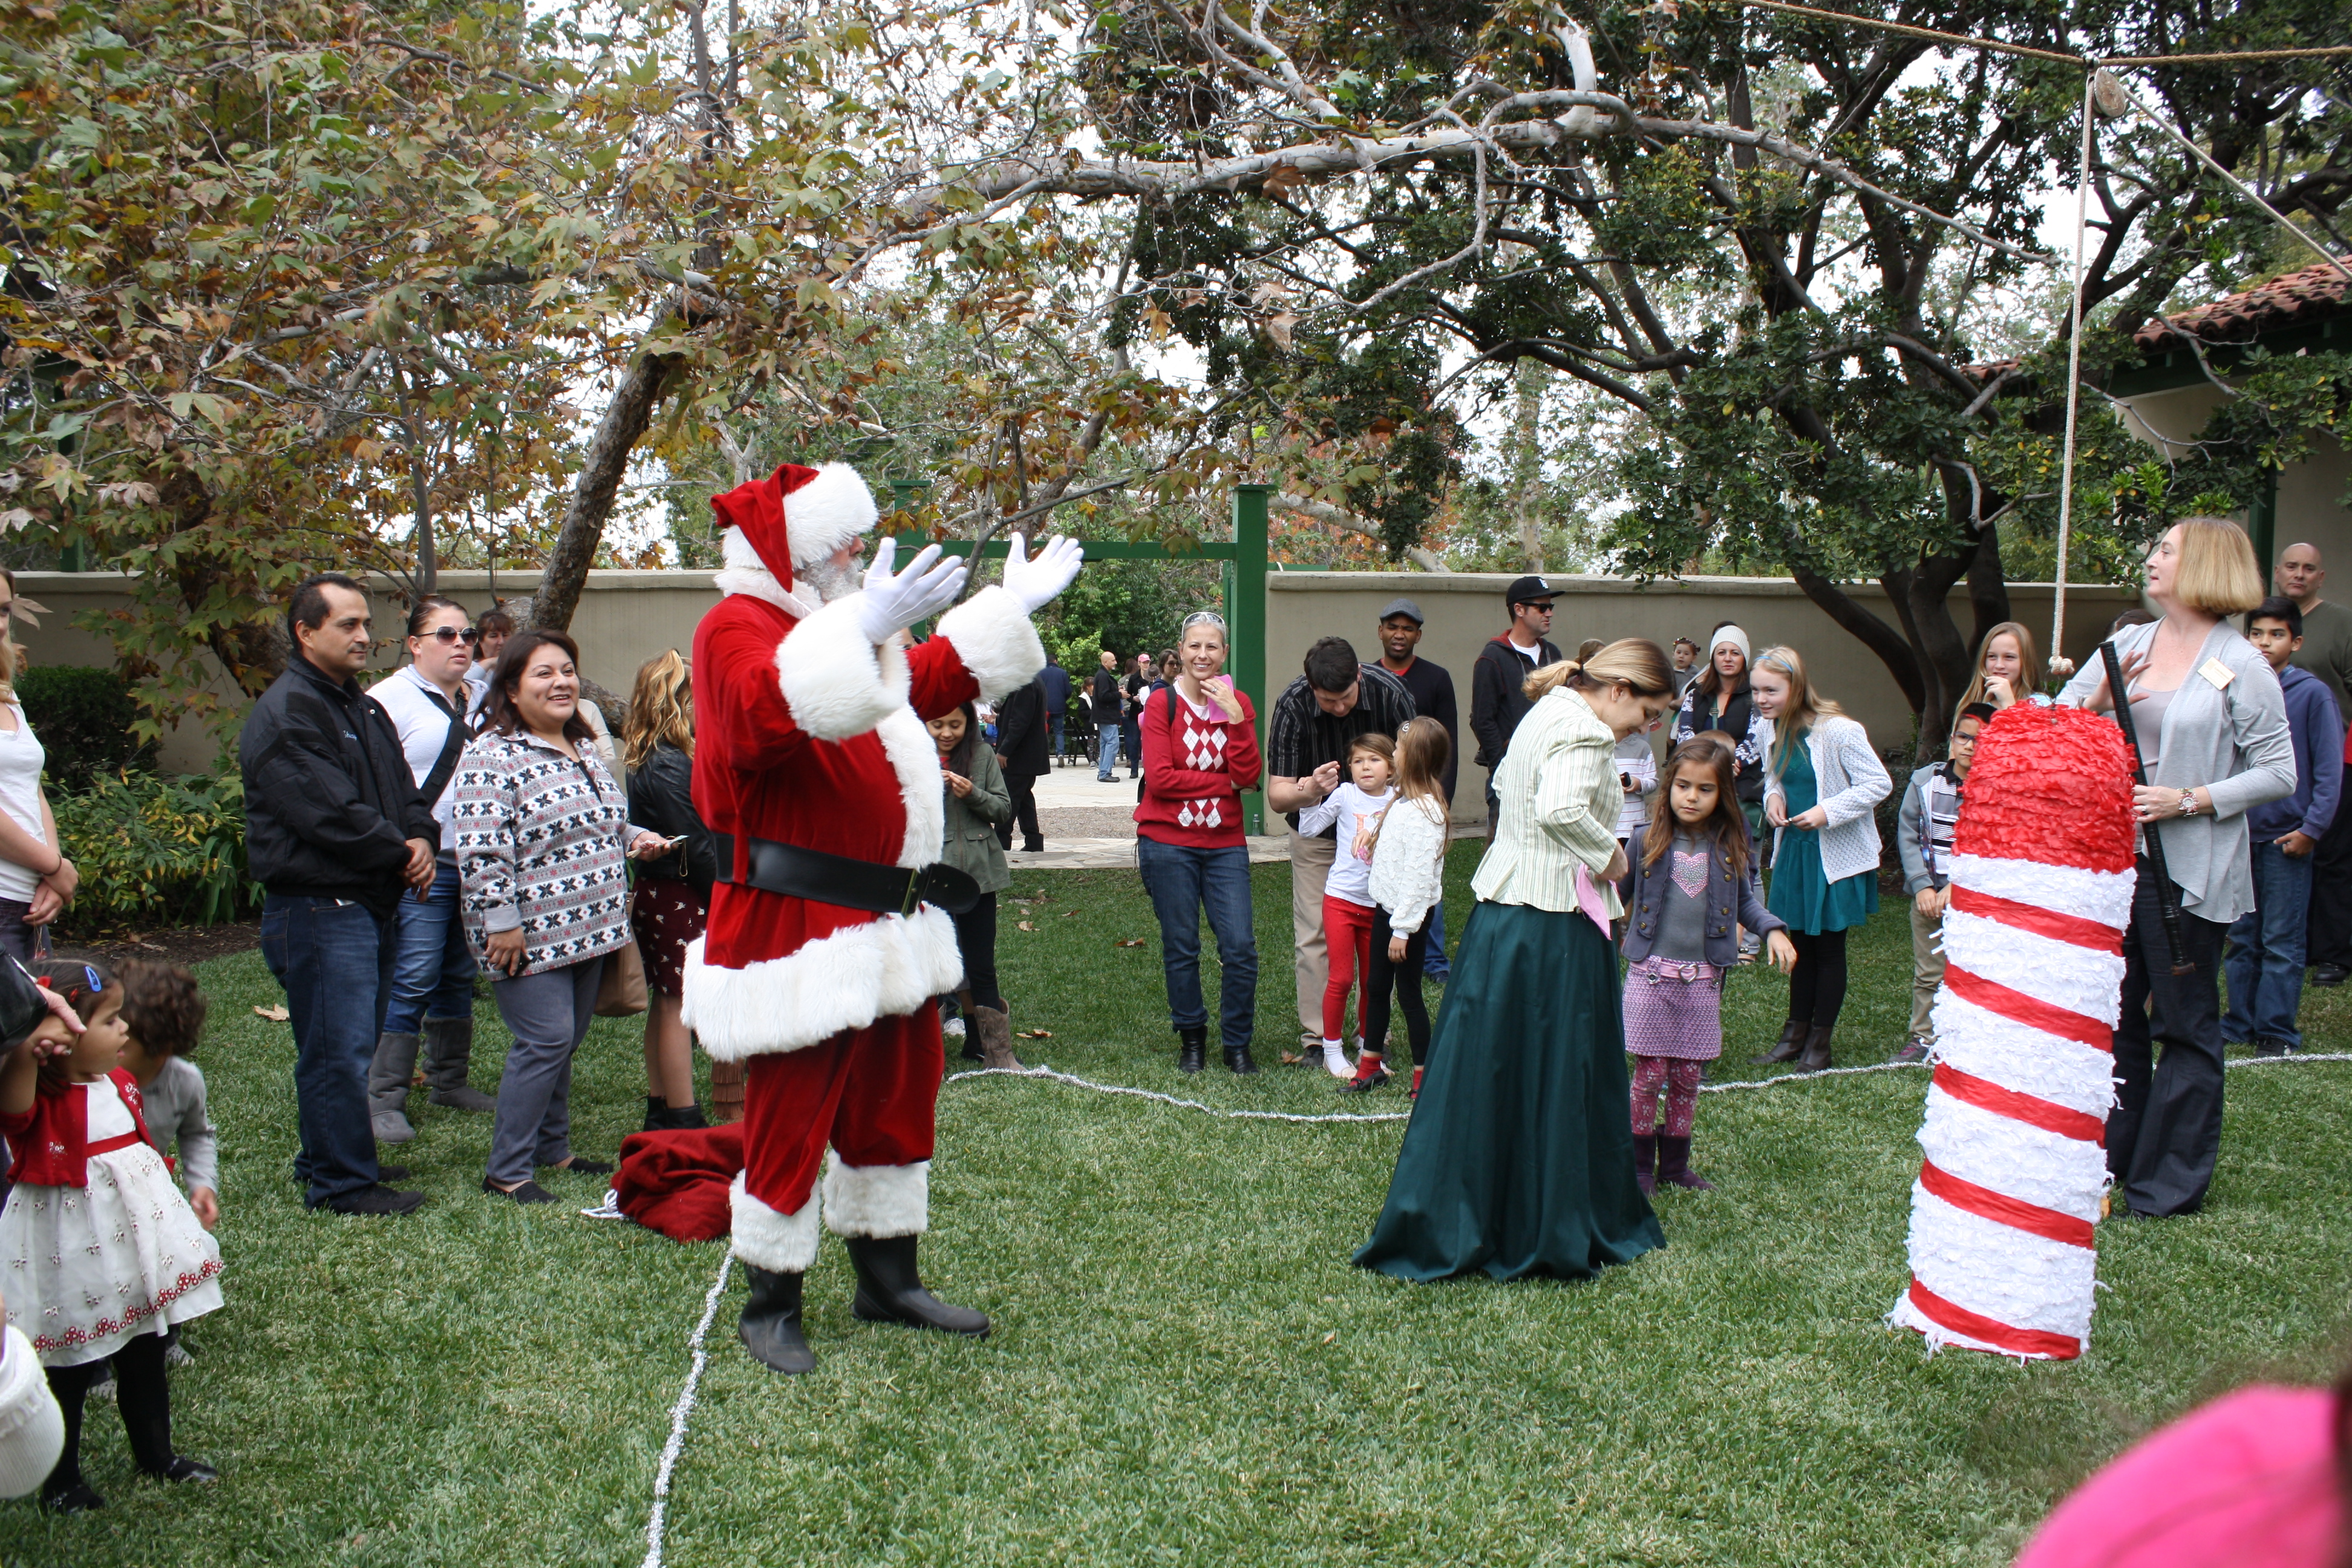 Rancho Los Cerritos hosts its annual "Home for the Holidays" event this year on Sunday, December 8, 2019. (Image - Santa in RLC courtyard w families and kids with a pinata.)